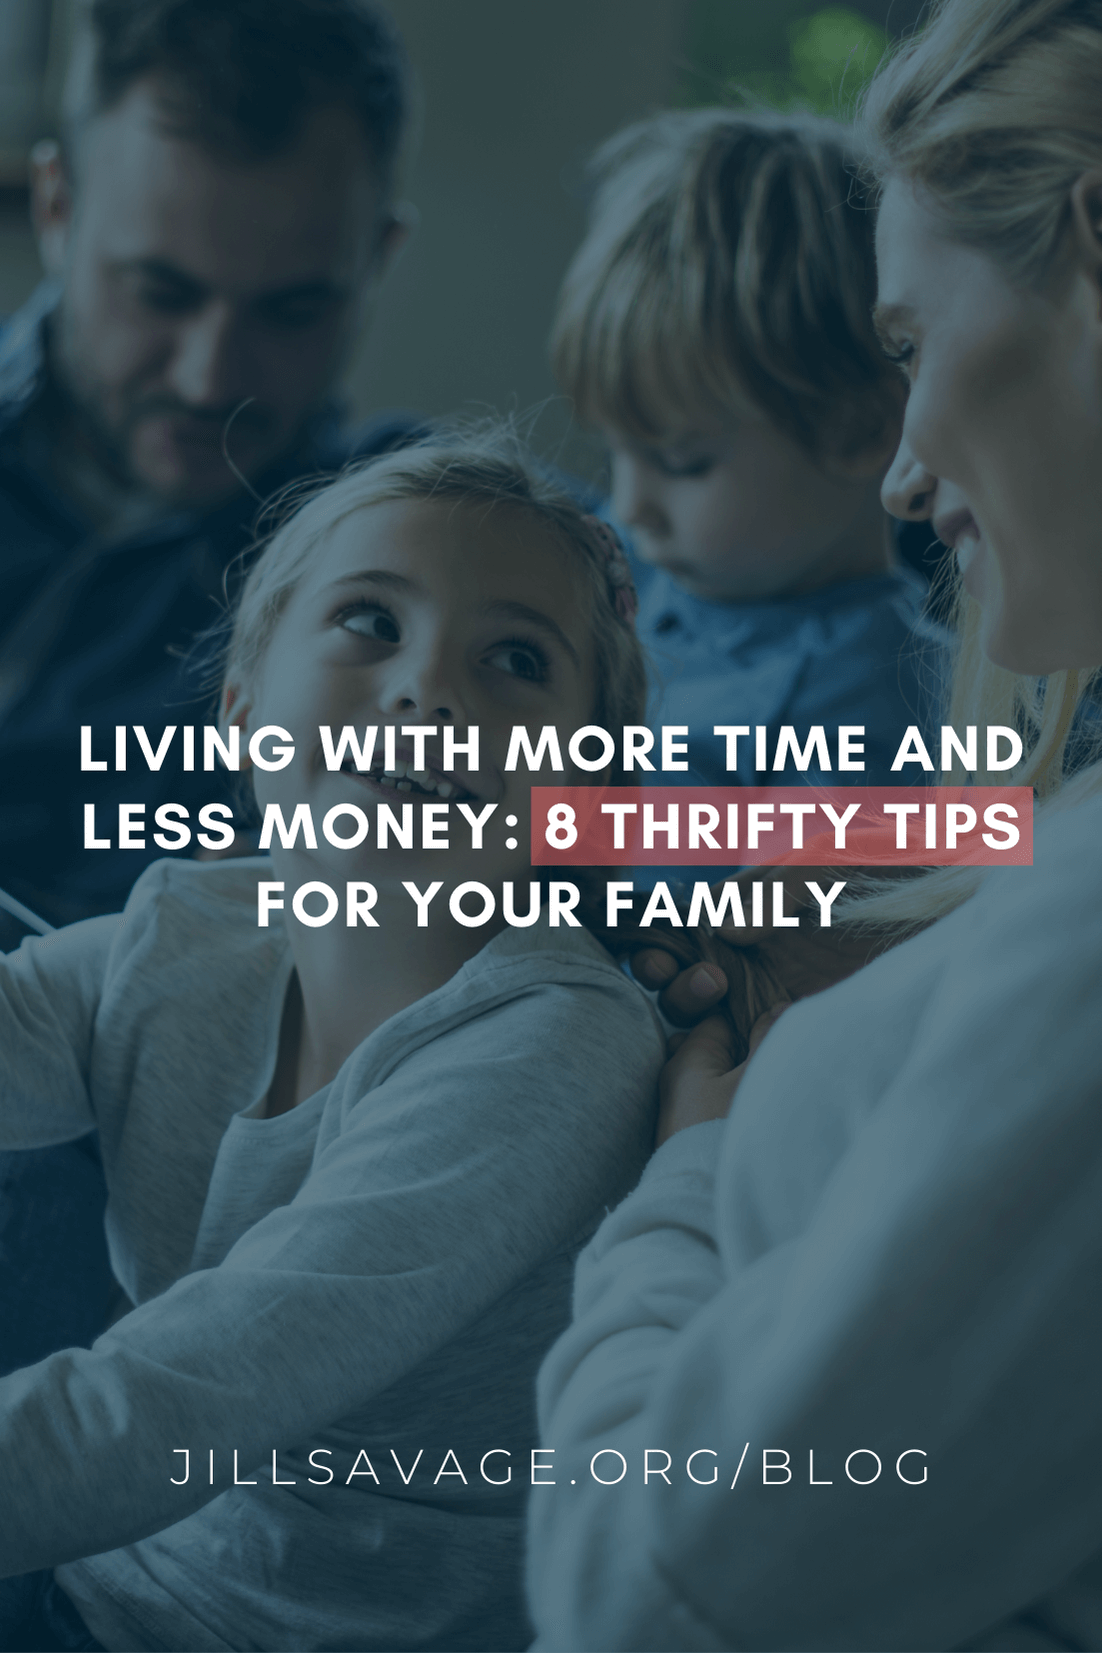 Living With More Time and Less Money: 8 Thrifty Tips for Your Family